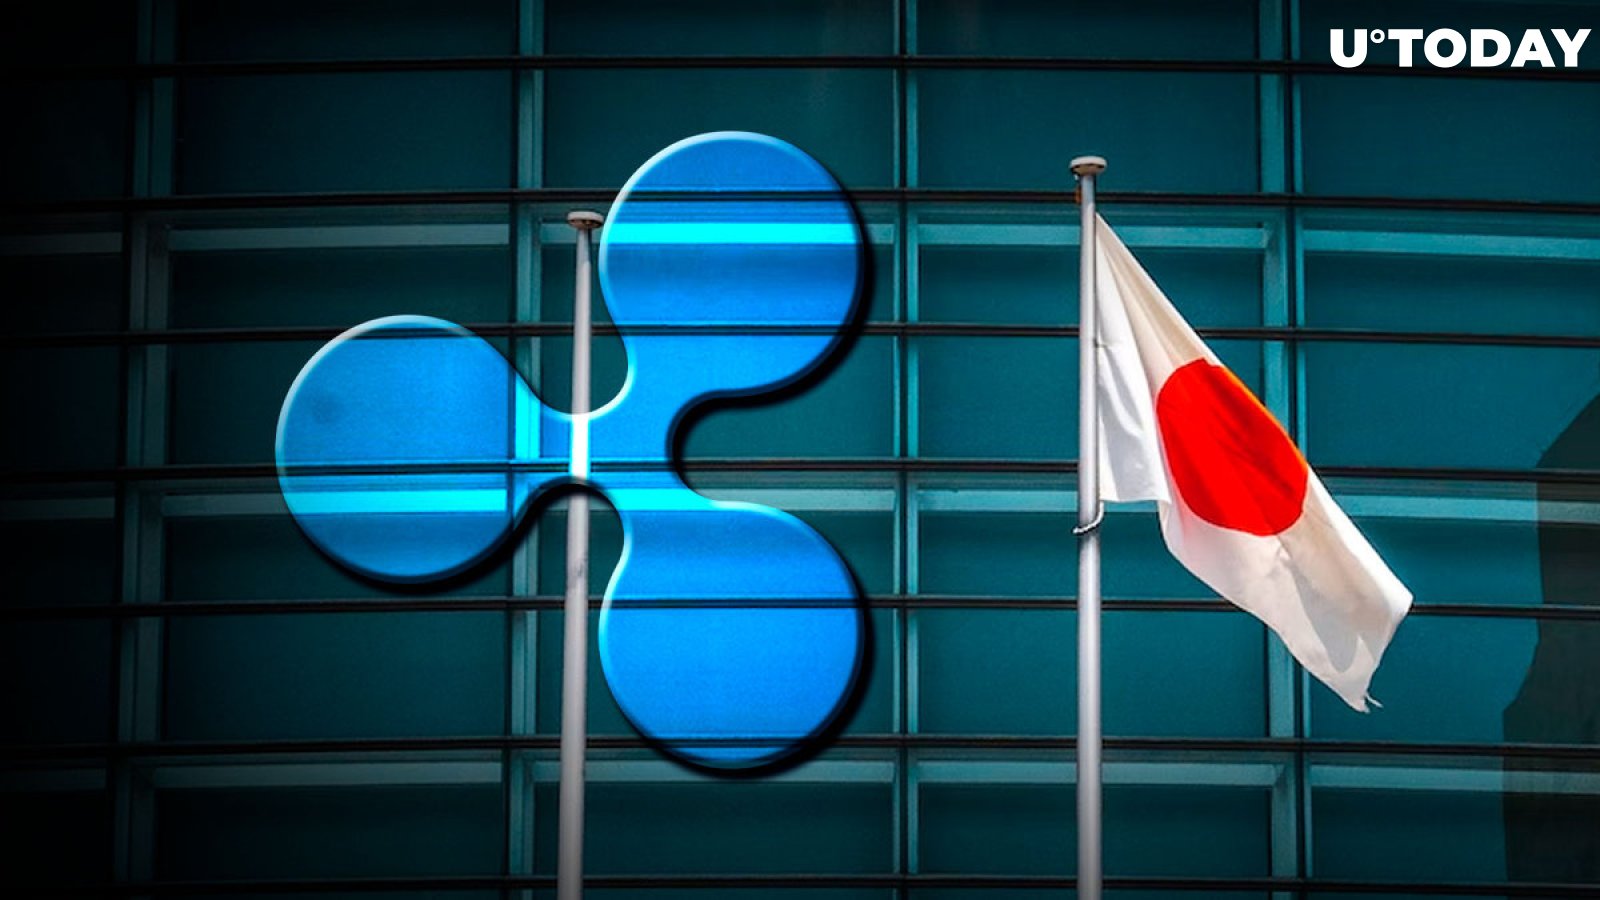 Ripple: City Mayor in Japan Visits To Discuss Crypto Adoption